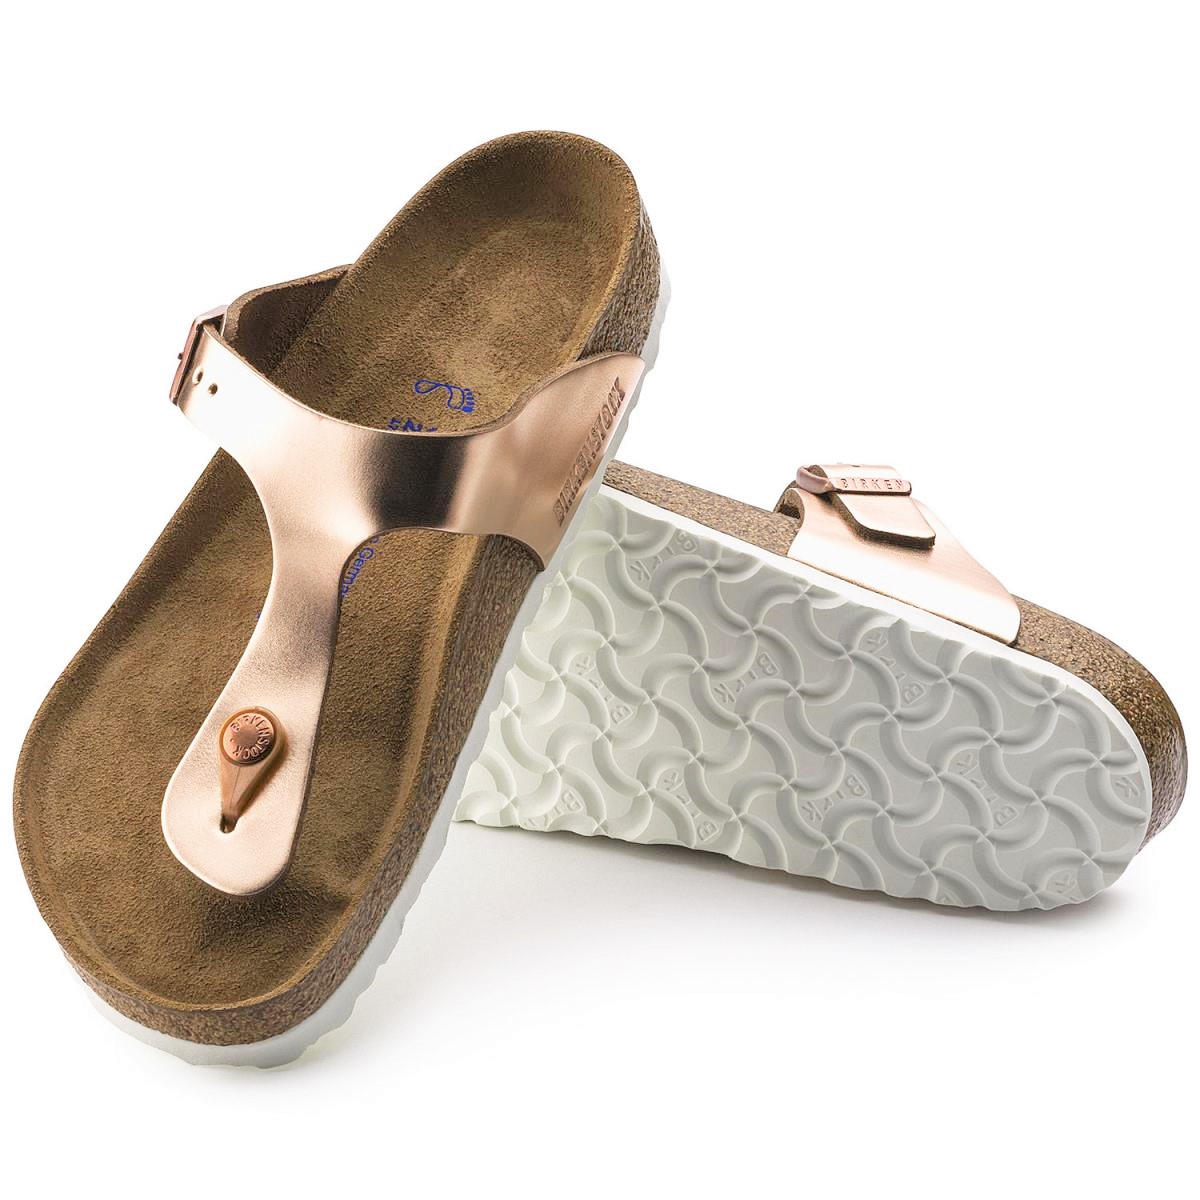 Timberland Carolista Women's Sandals Copper - Buy At Outlet Prices!